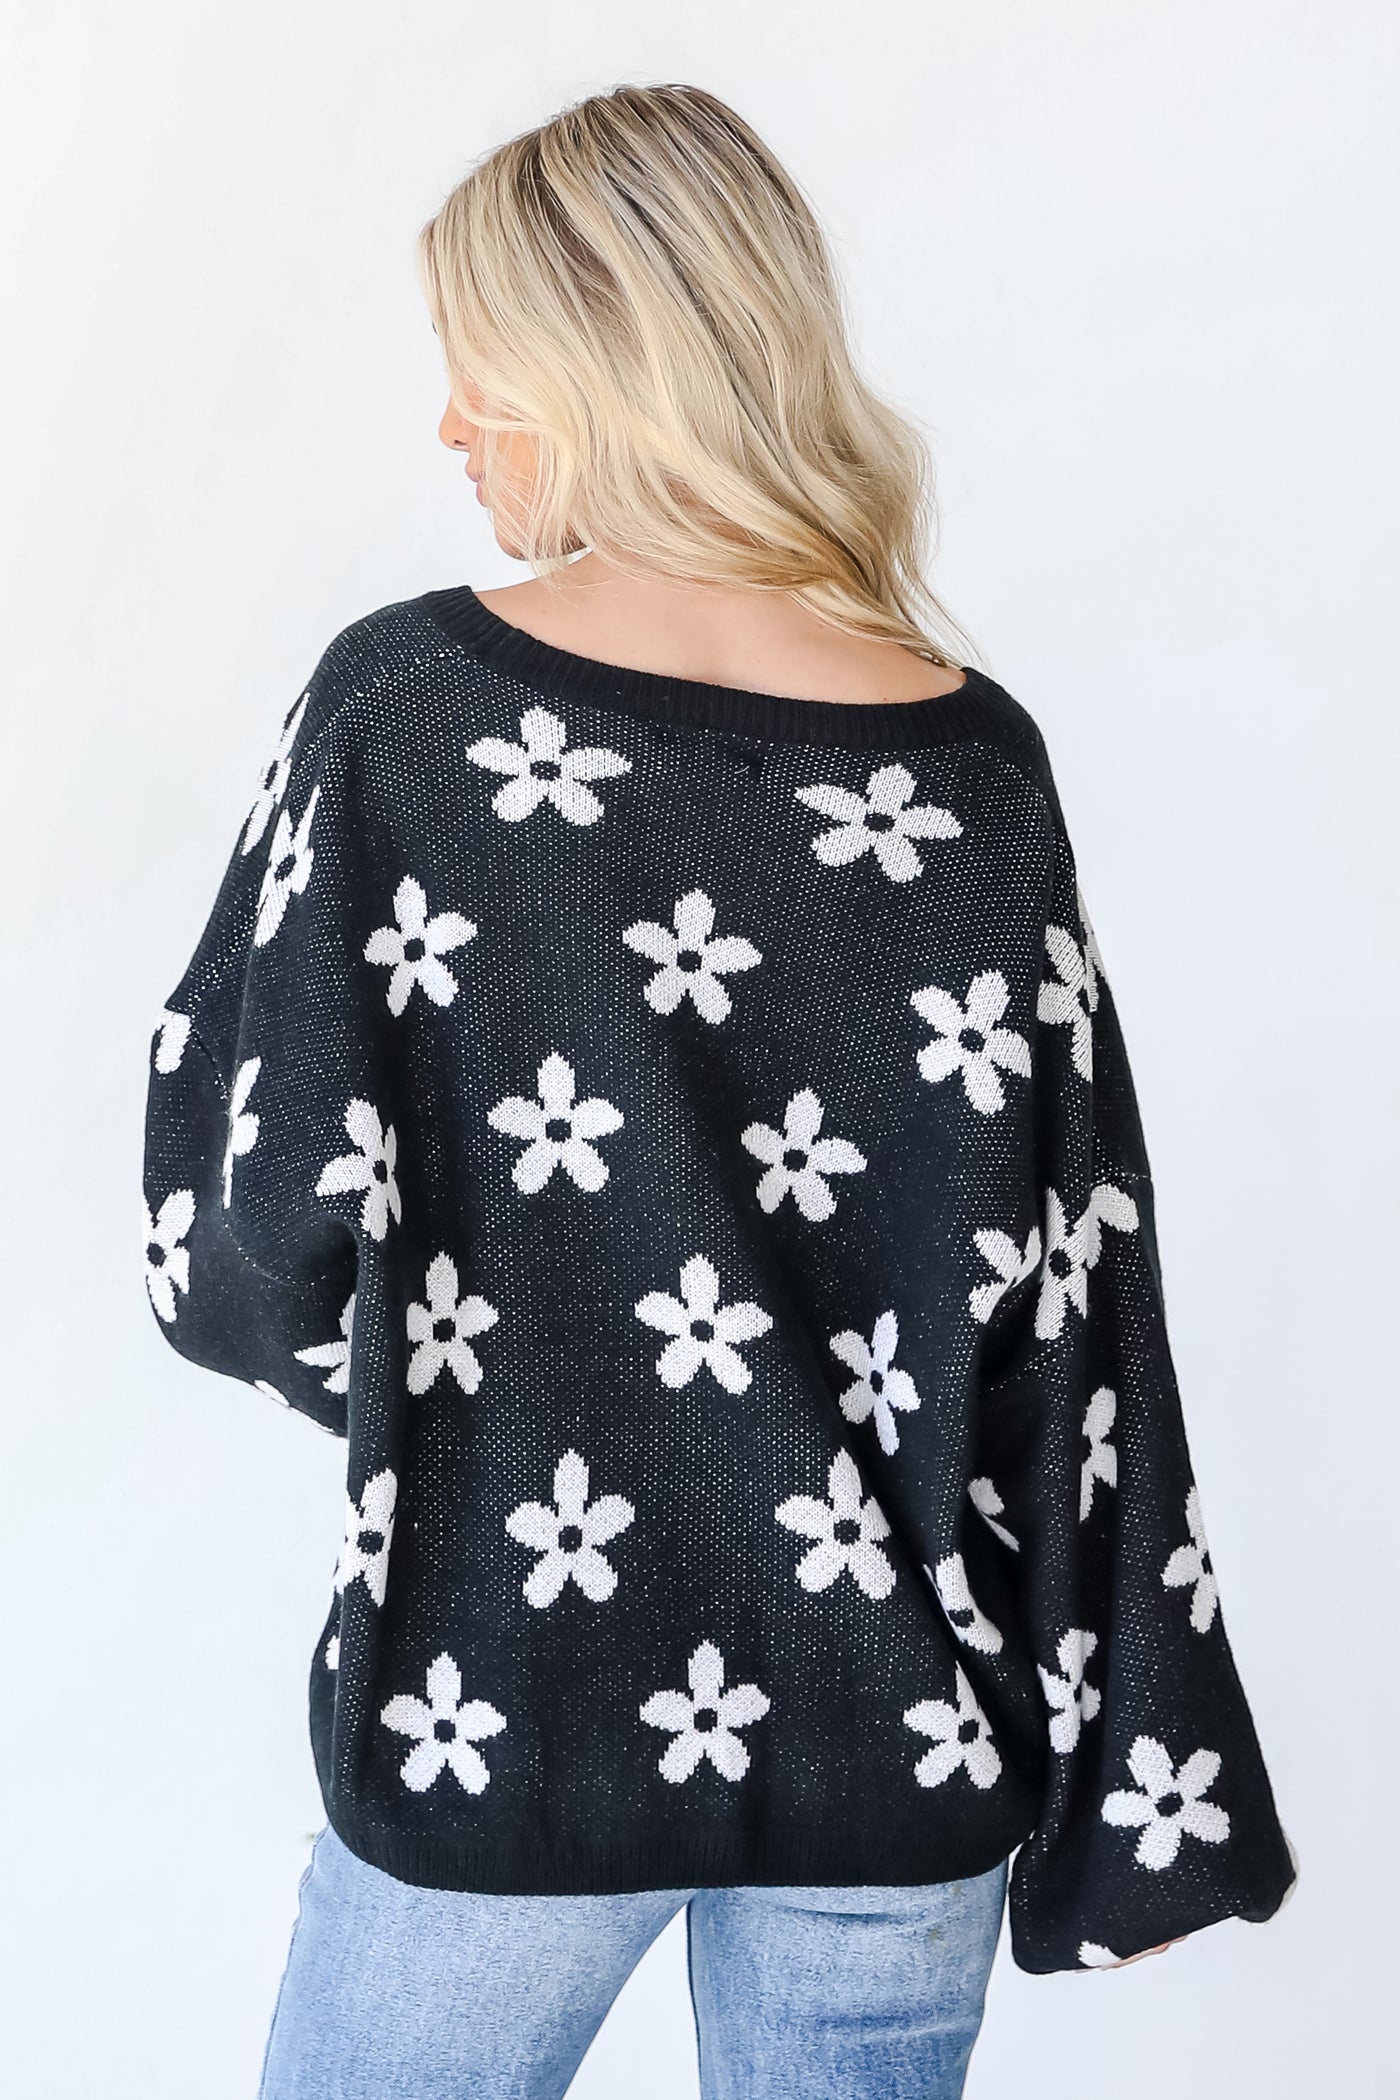 Daisies Sweater back view